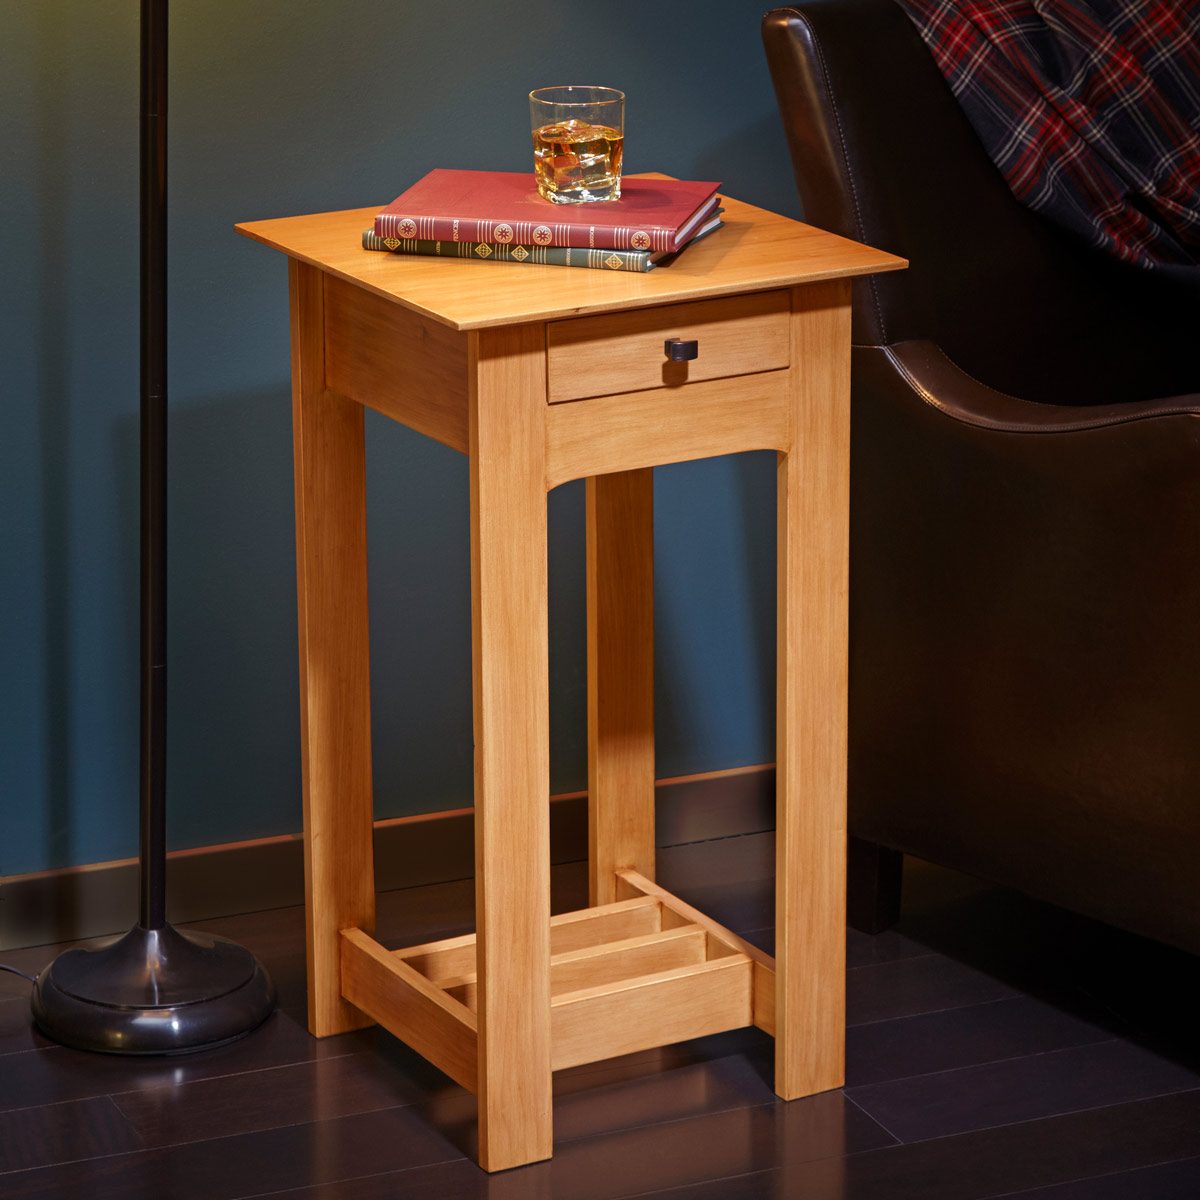 12 Incredible DIY End Tables: Simple End Table Ideas